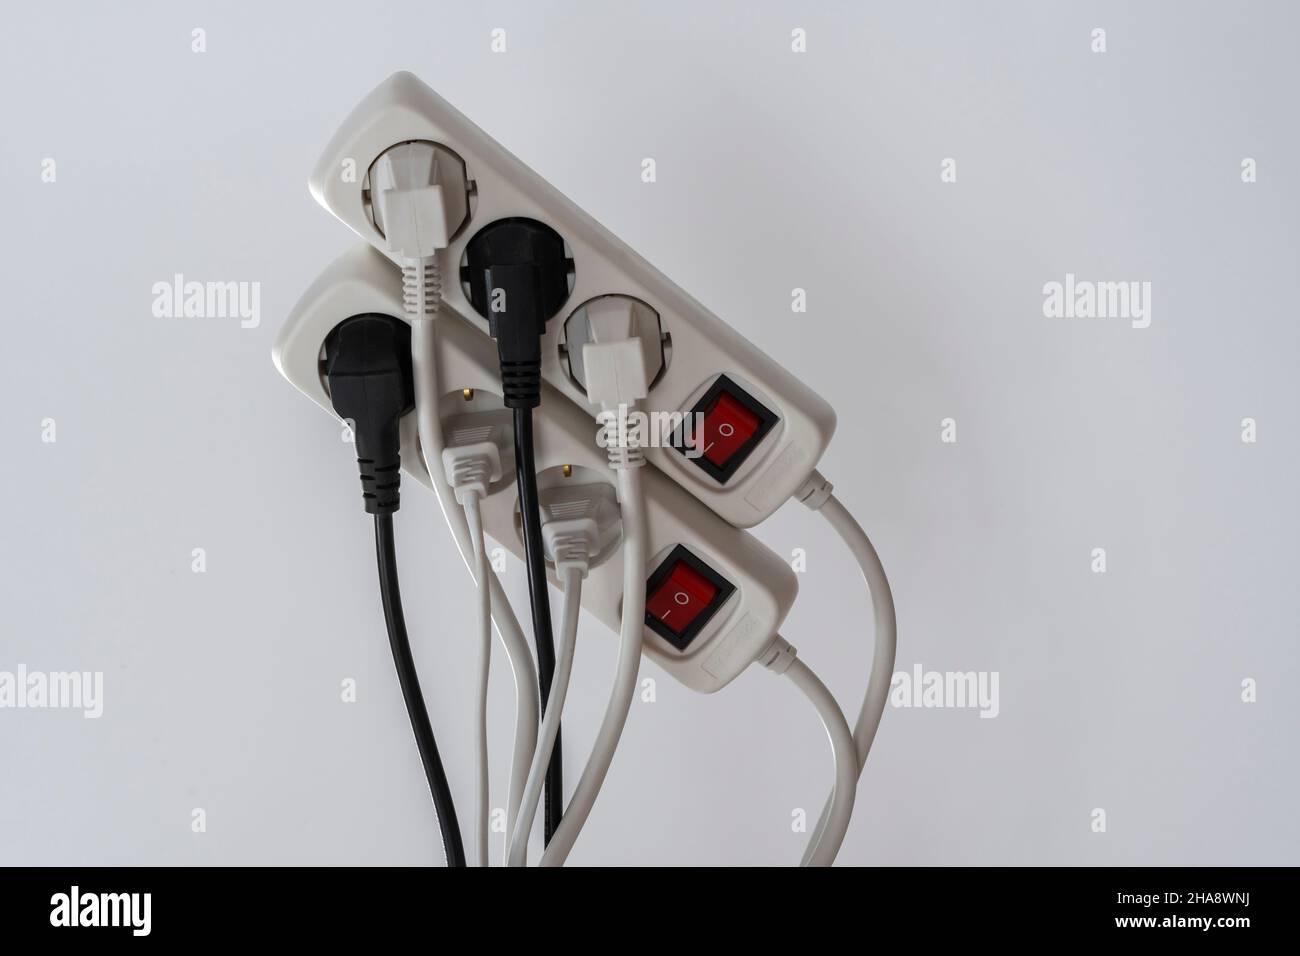 Wires plugged into power bar Stock Photo